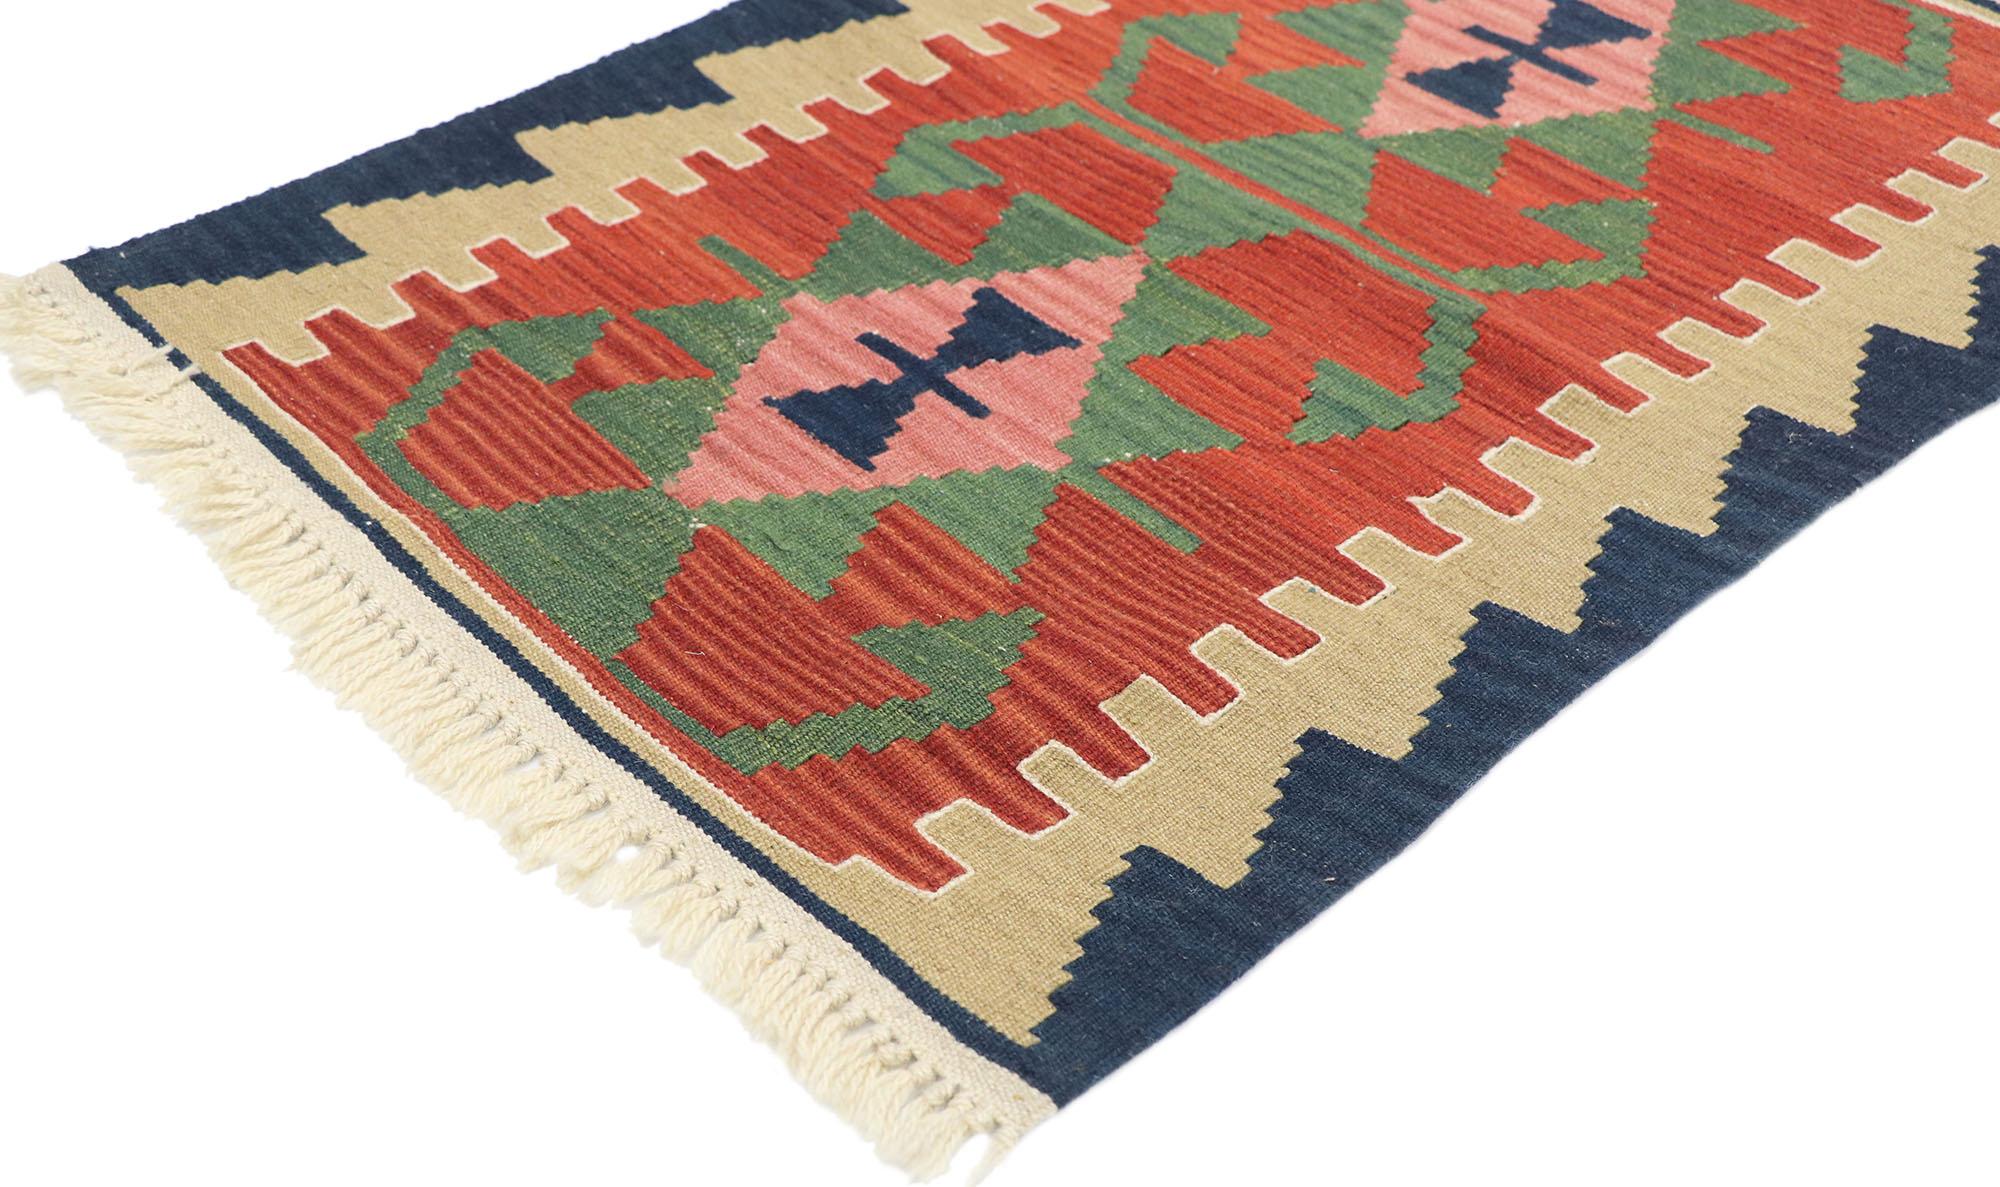 77880, Vintage Persian Shiraz Kilim rug with Tribal style 02'00 x 03'00. Full of tiny details and a bold expressive design combined with vibrant colors and tribal style, this hand-woven wool vintage Persian Shiraz kilim rug is a captivating vision